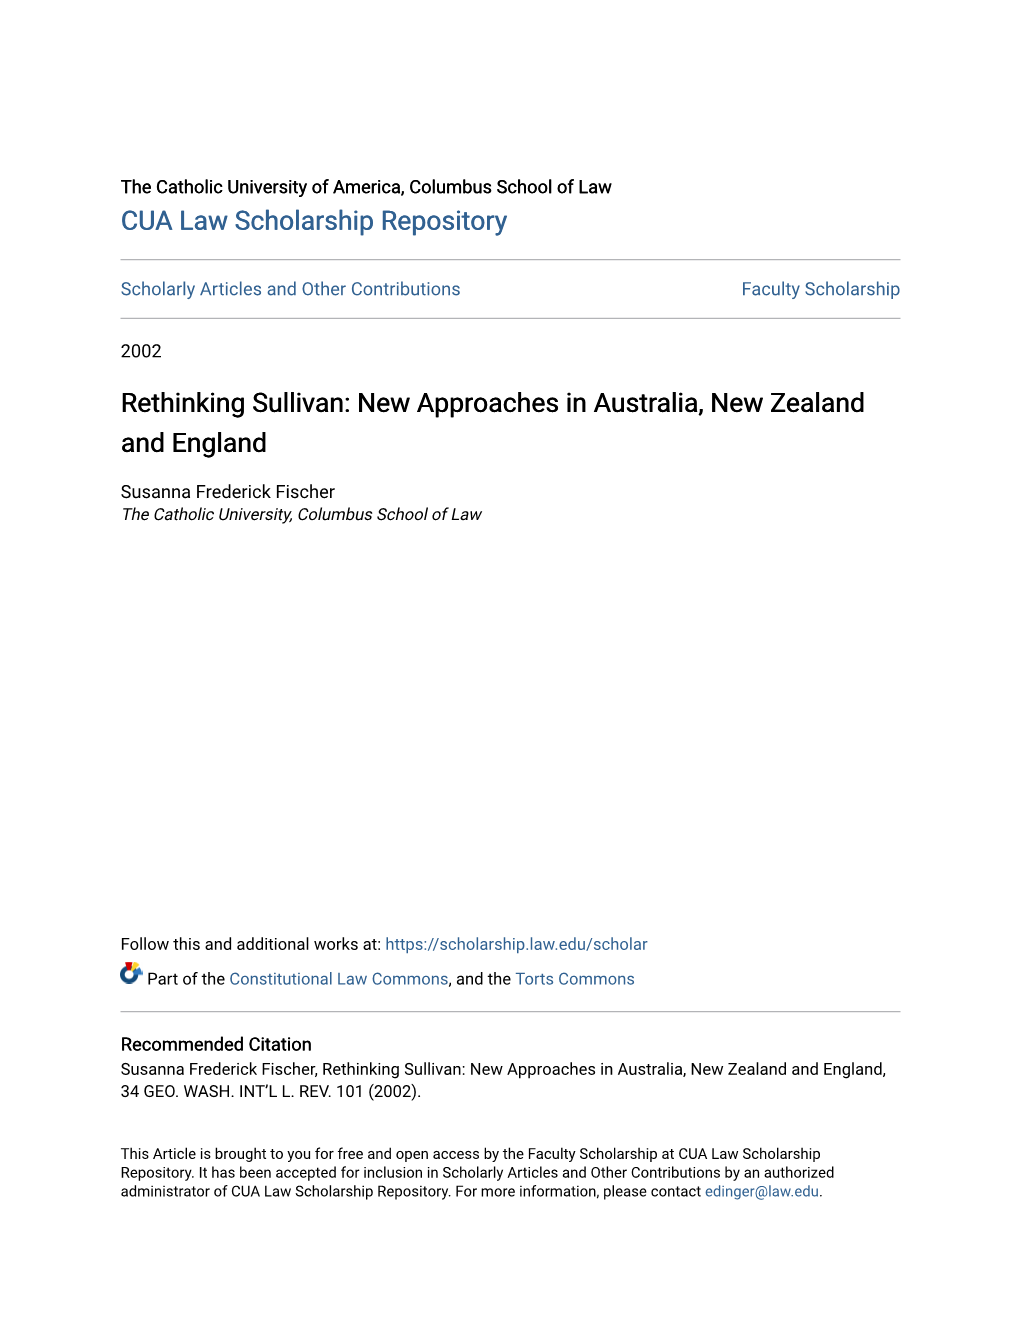 Rethinking Sullivan: New Approaches in Australia, New Zealand and England